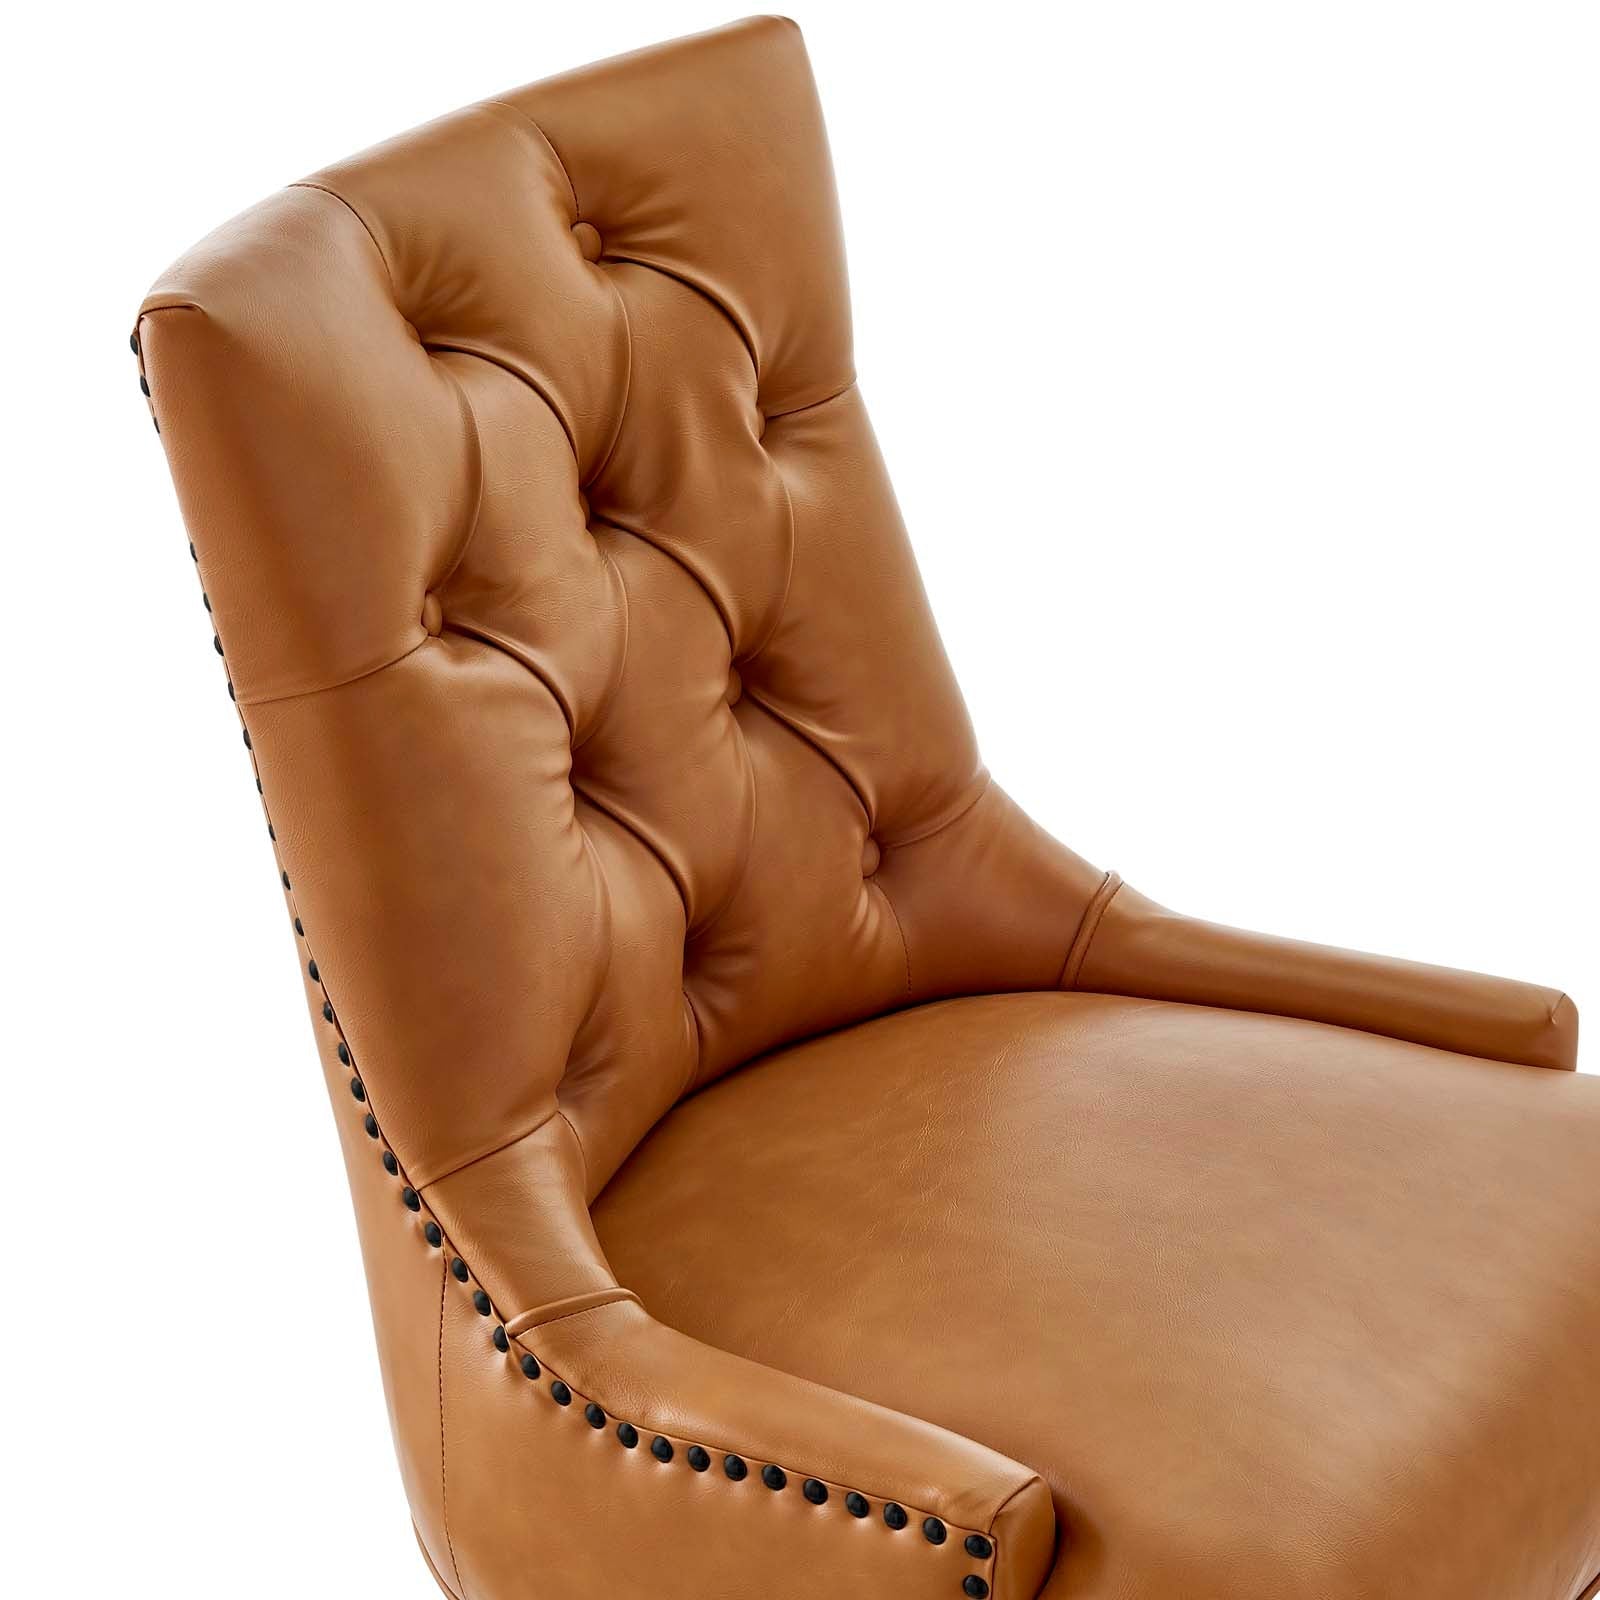 Andrew Vegan Leather Office Chair